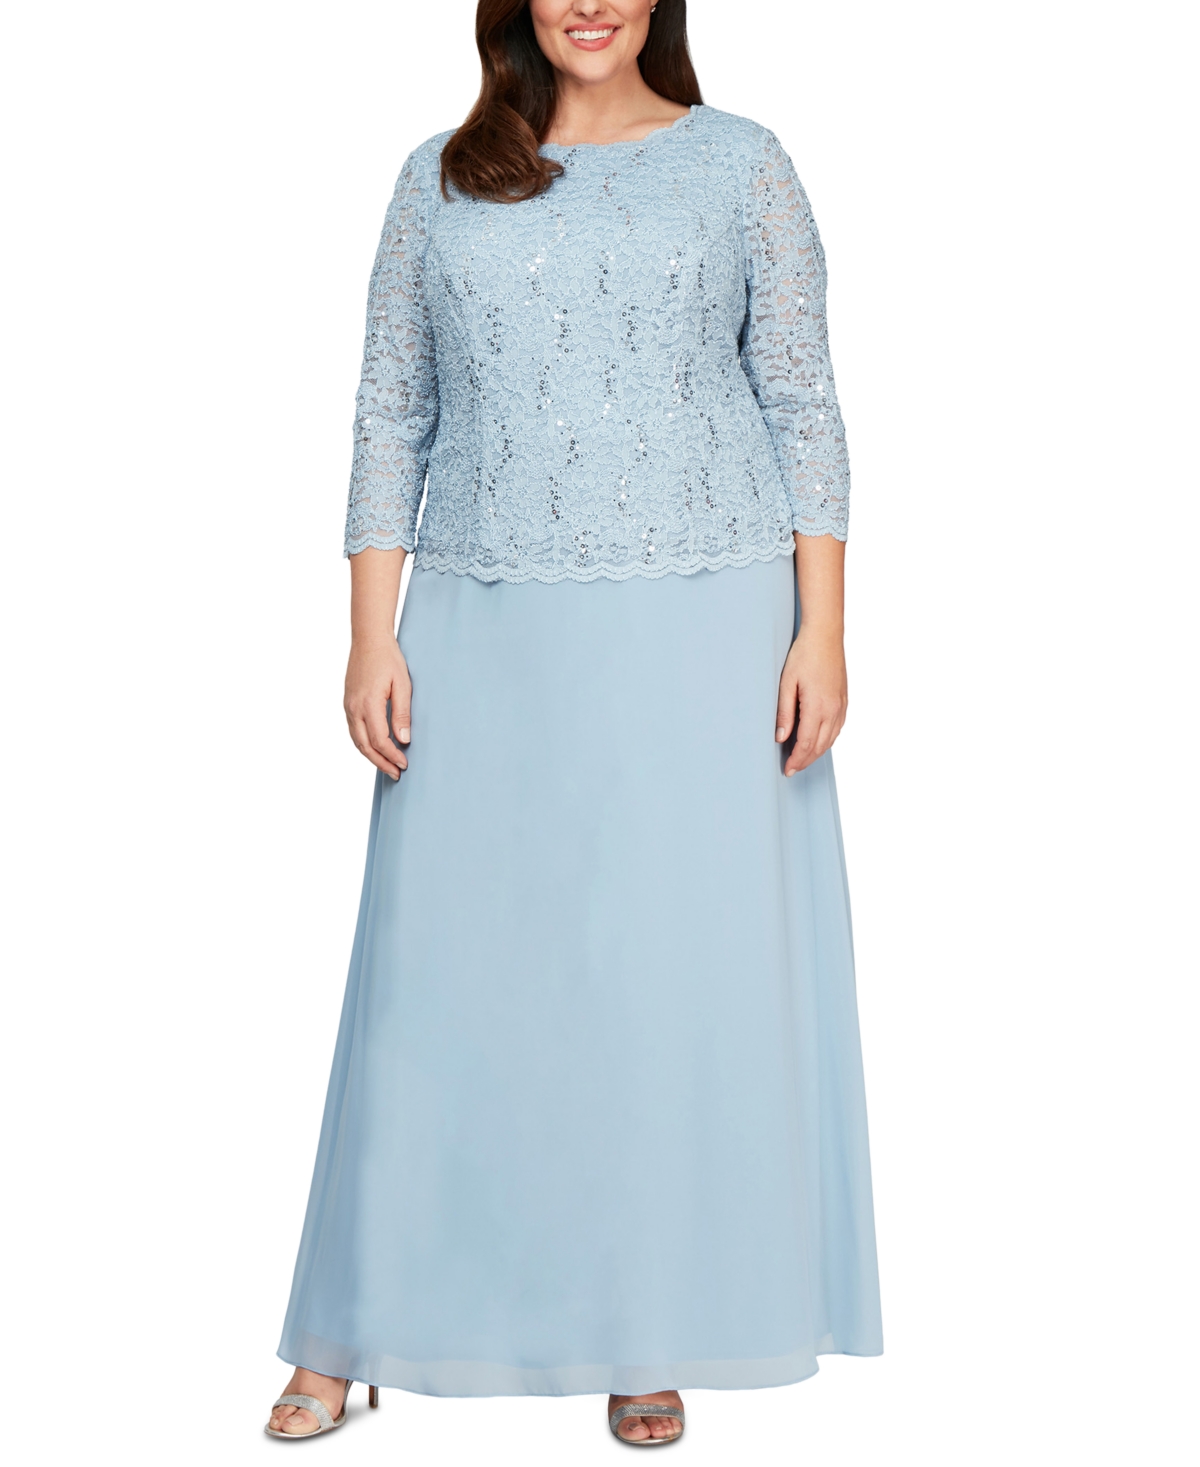 Plus Sequined Scalloped Edge Lace Top Gown - Sky Blue